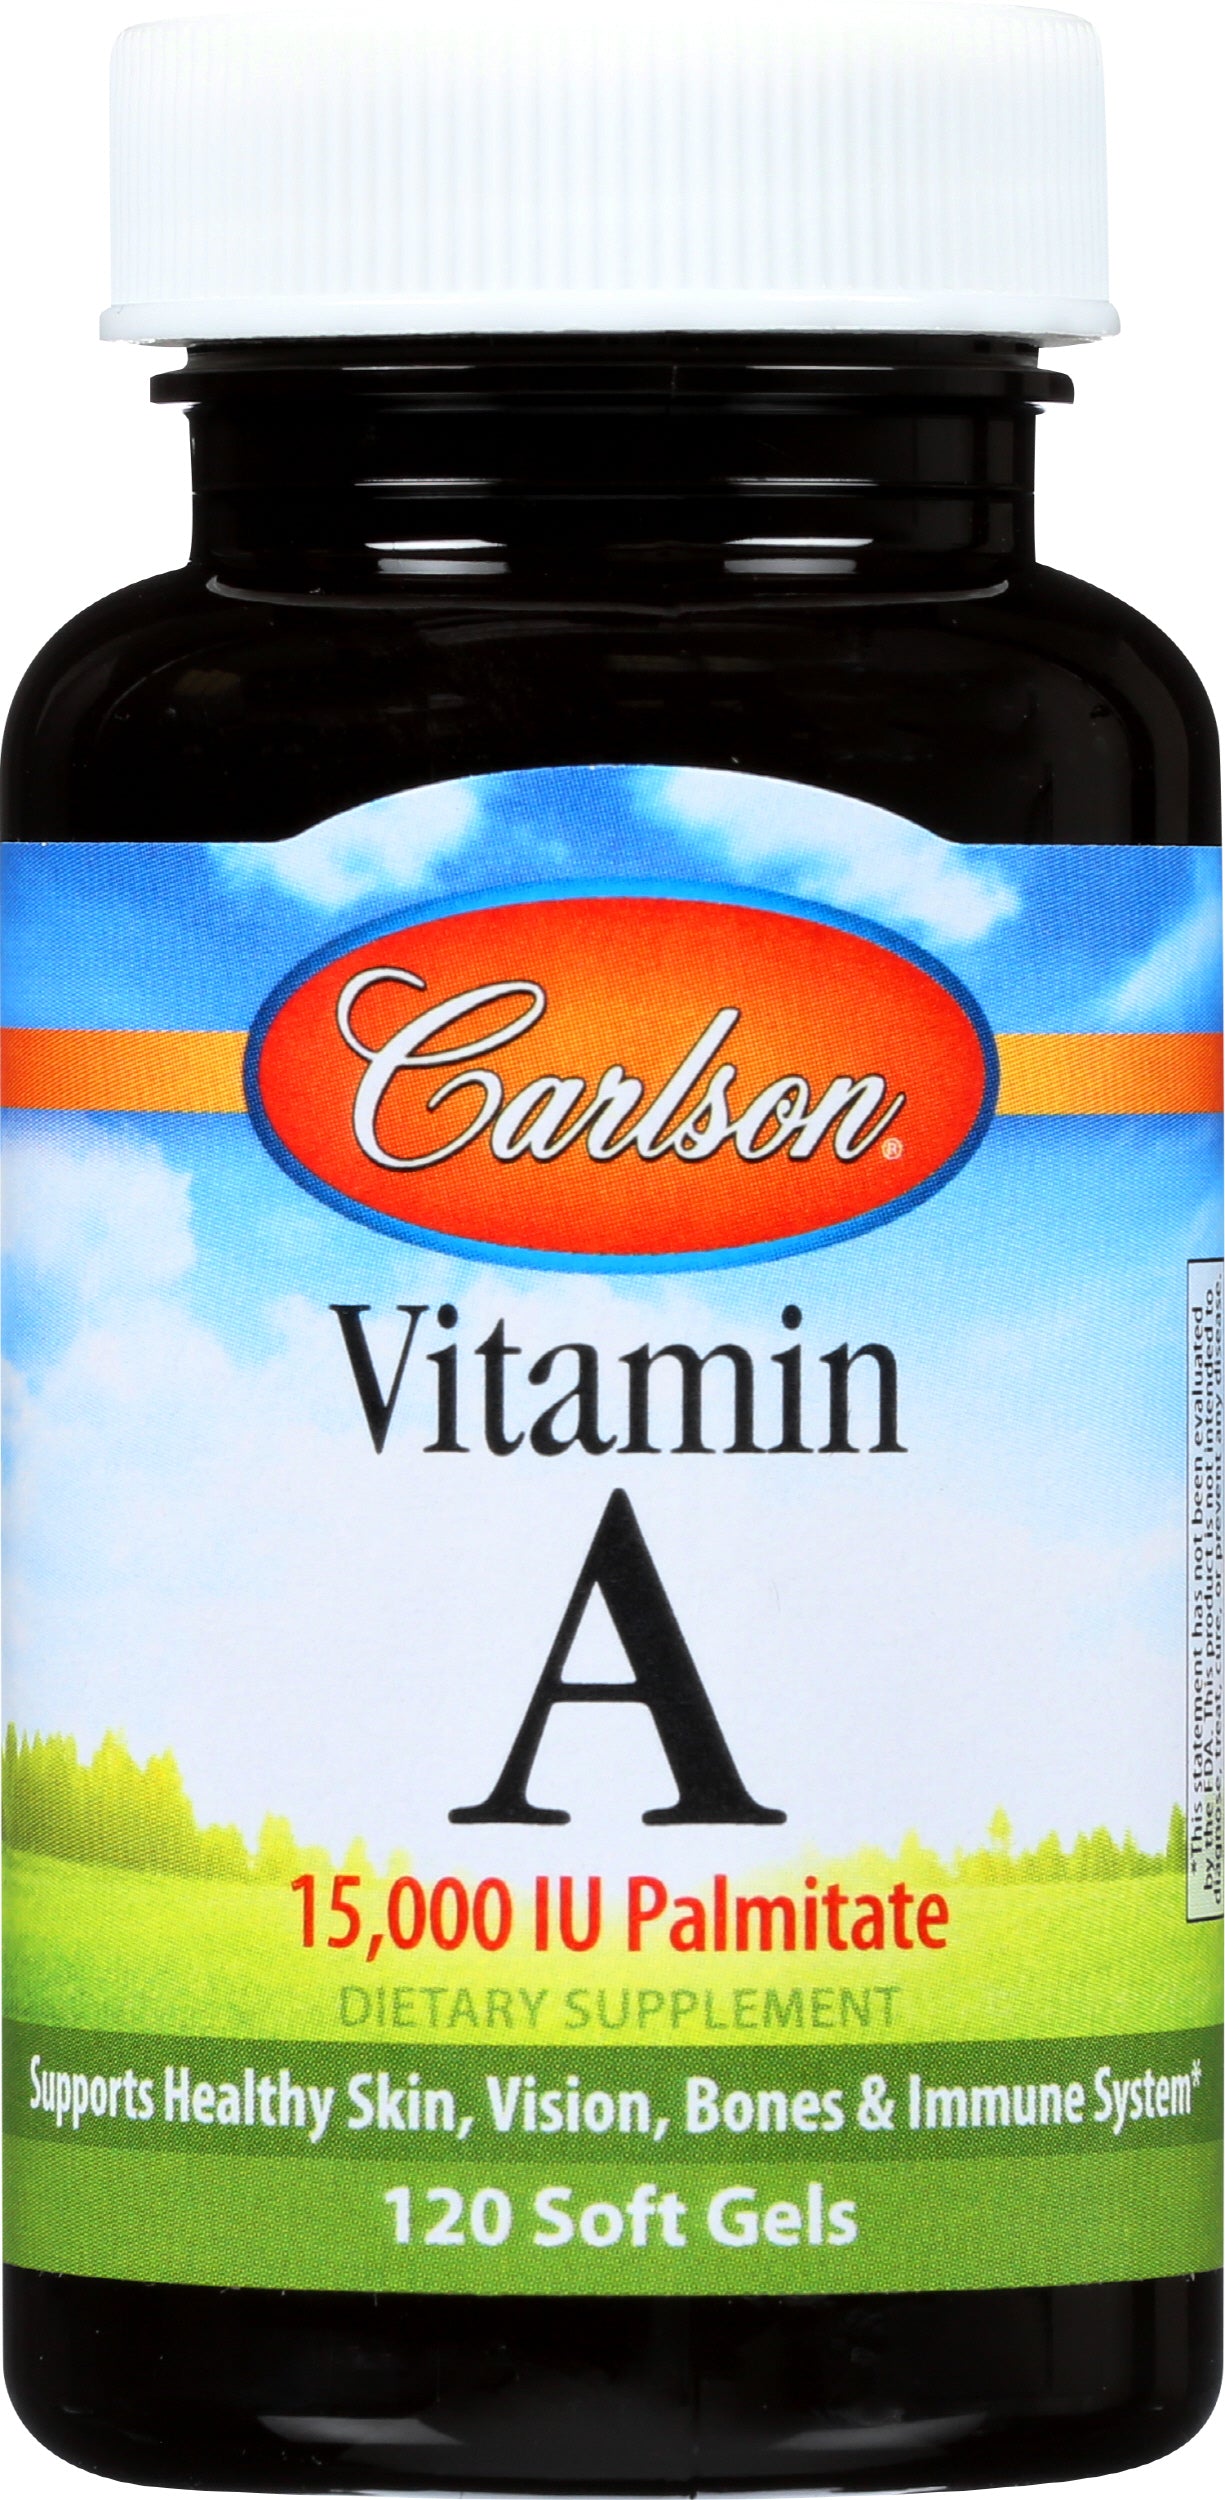 Carlson Vitamin A 15,000 IU Palmitate 120 Soft Gels Front of Bottle